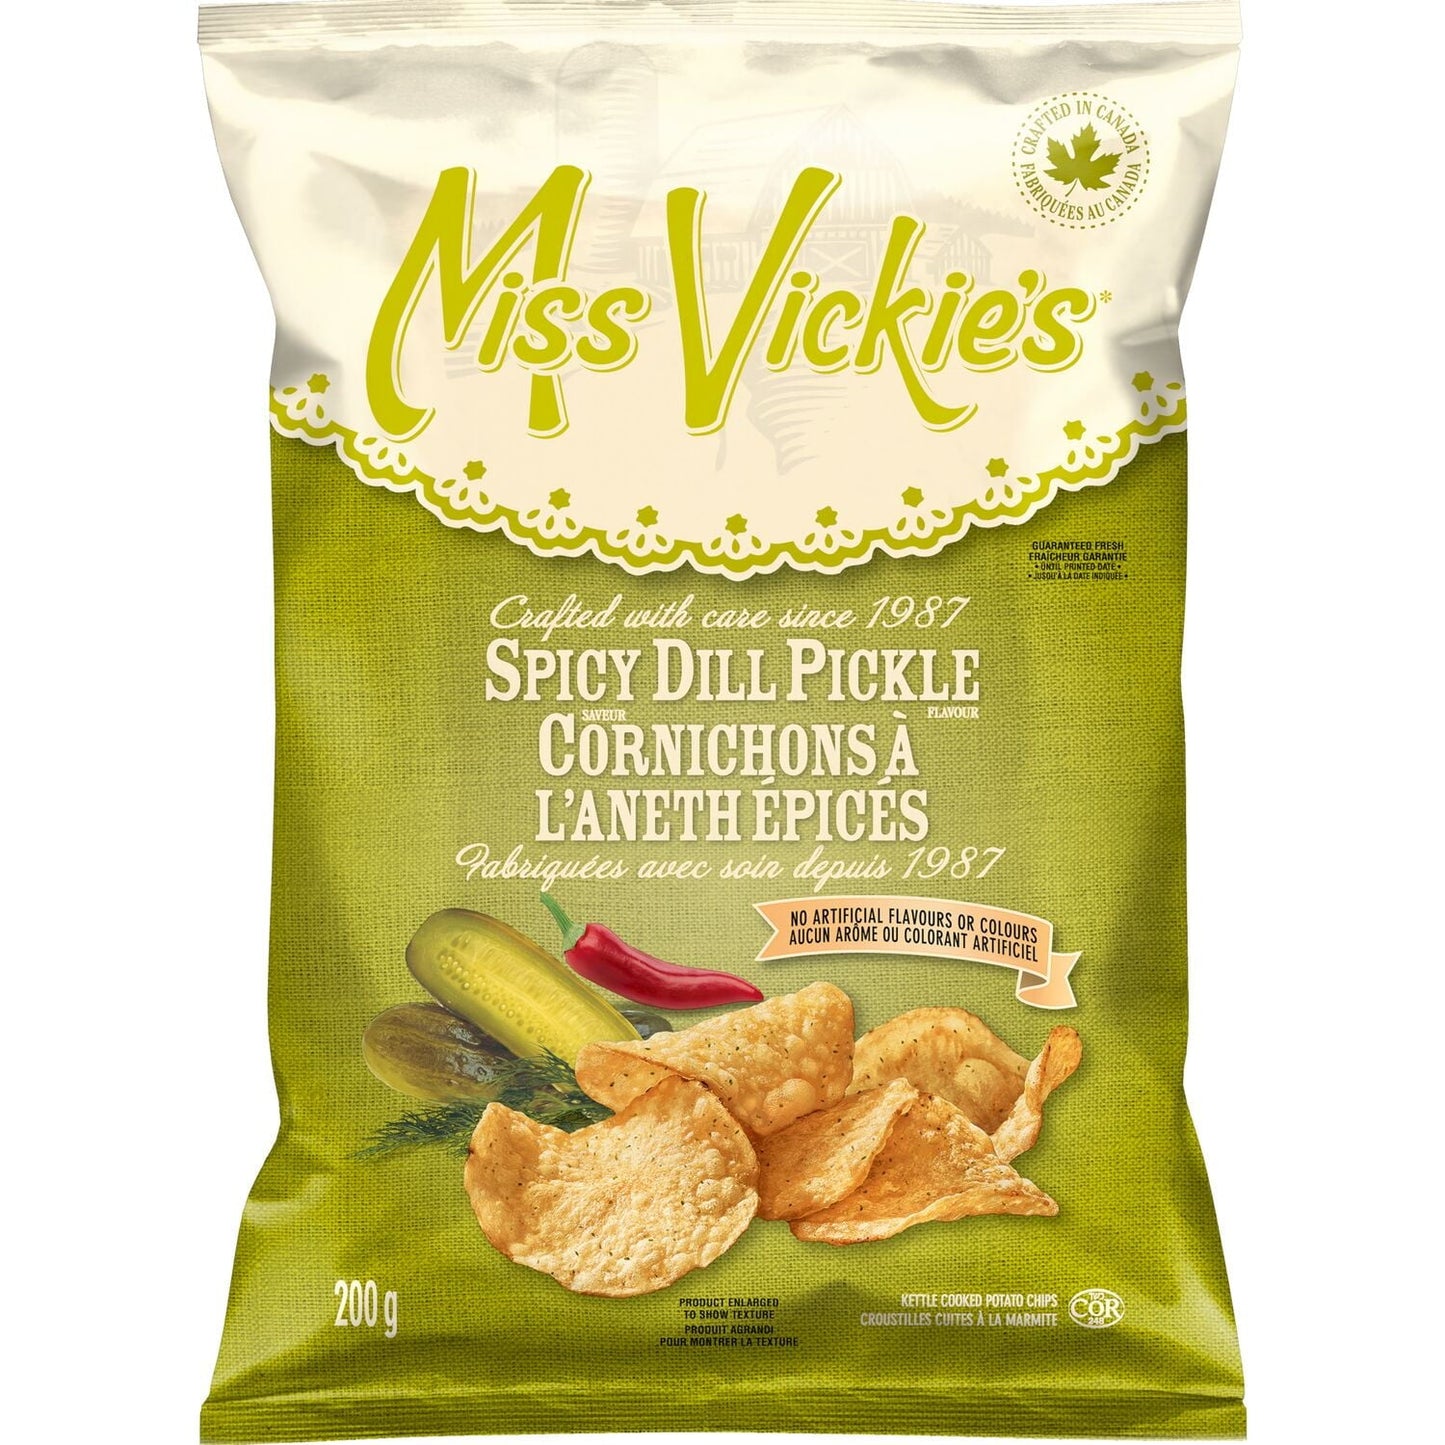 Miss Vickie's Spicy Dill Pickle 200g - Case of 12